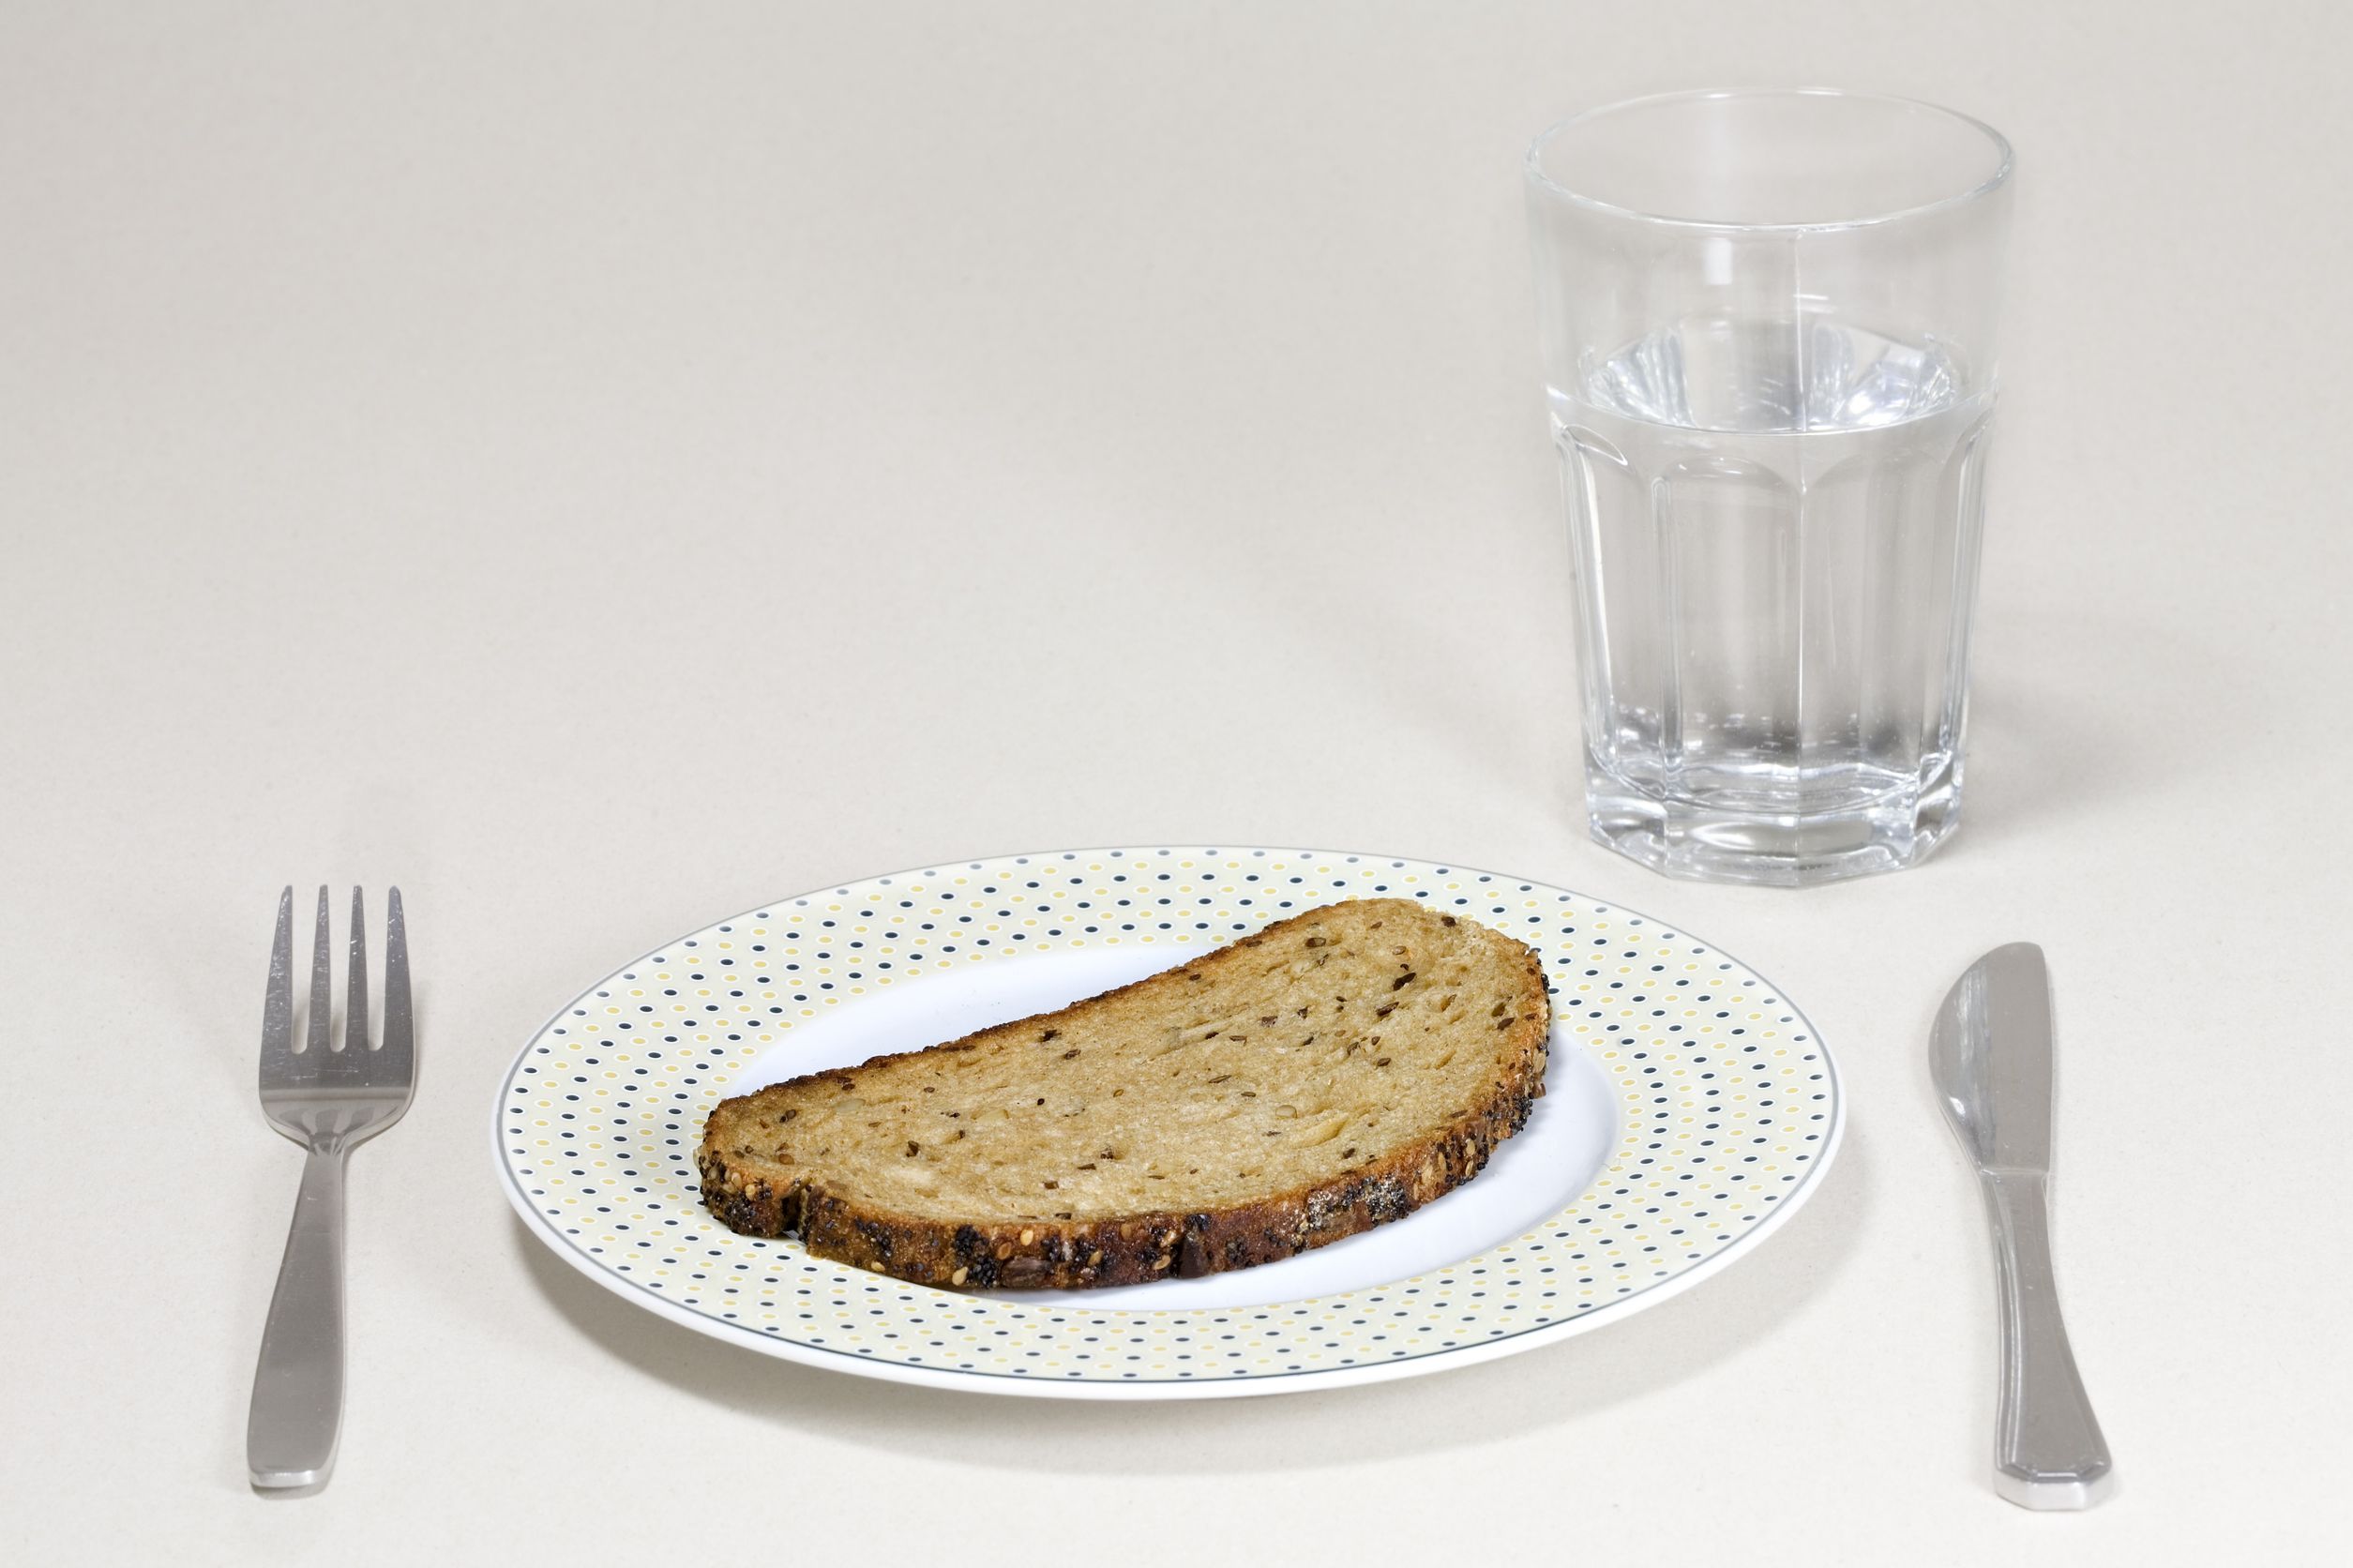 Bread and water standard license – The Sexy Beast Diet